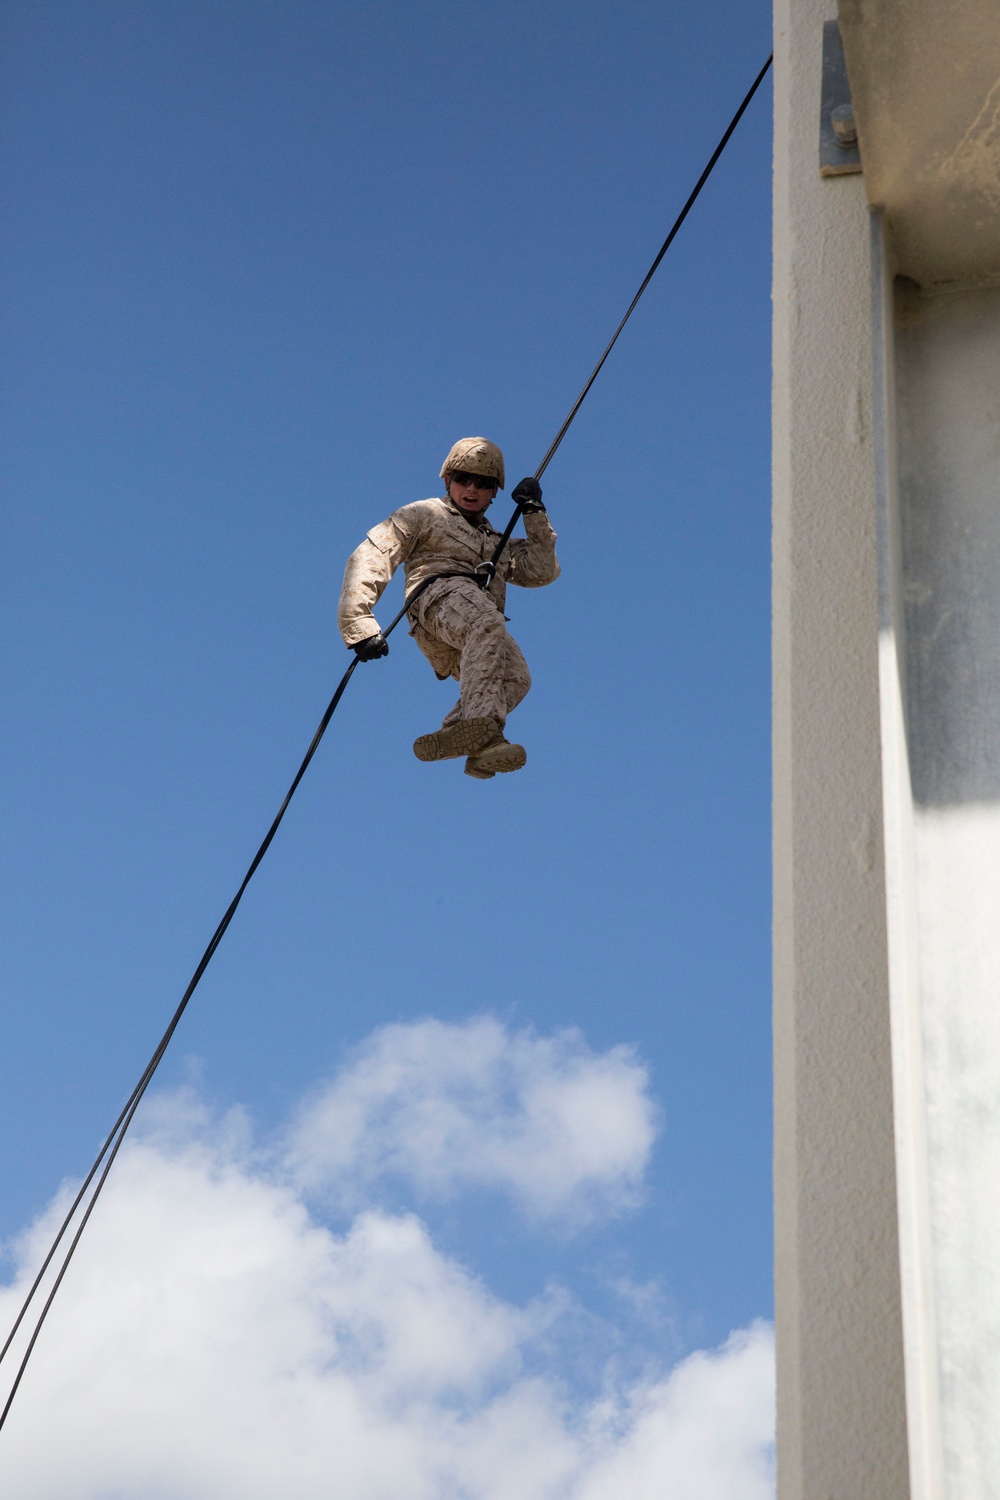 Marines on rappel: 5th ANGLICO executes insertion techniques